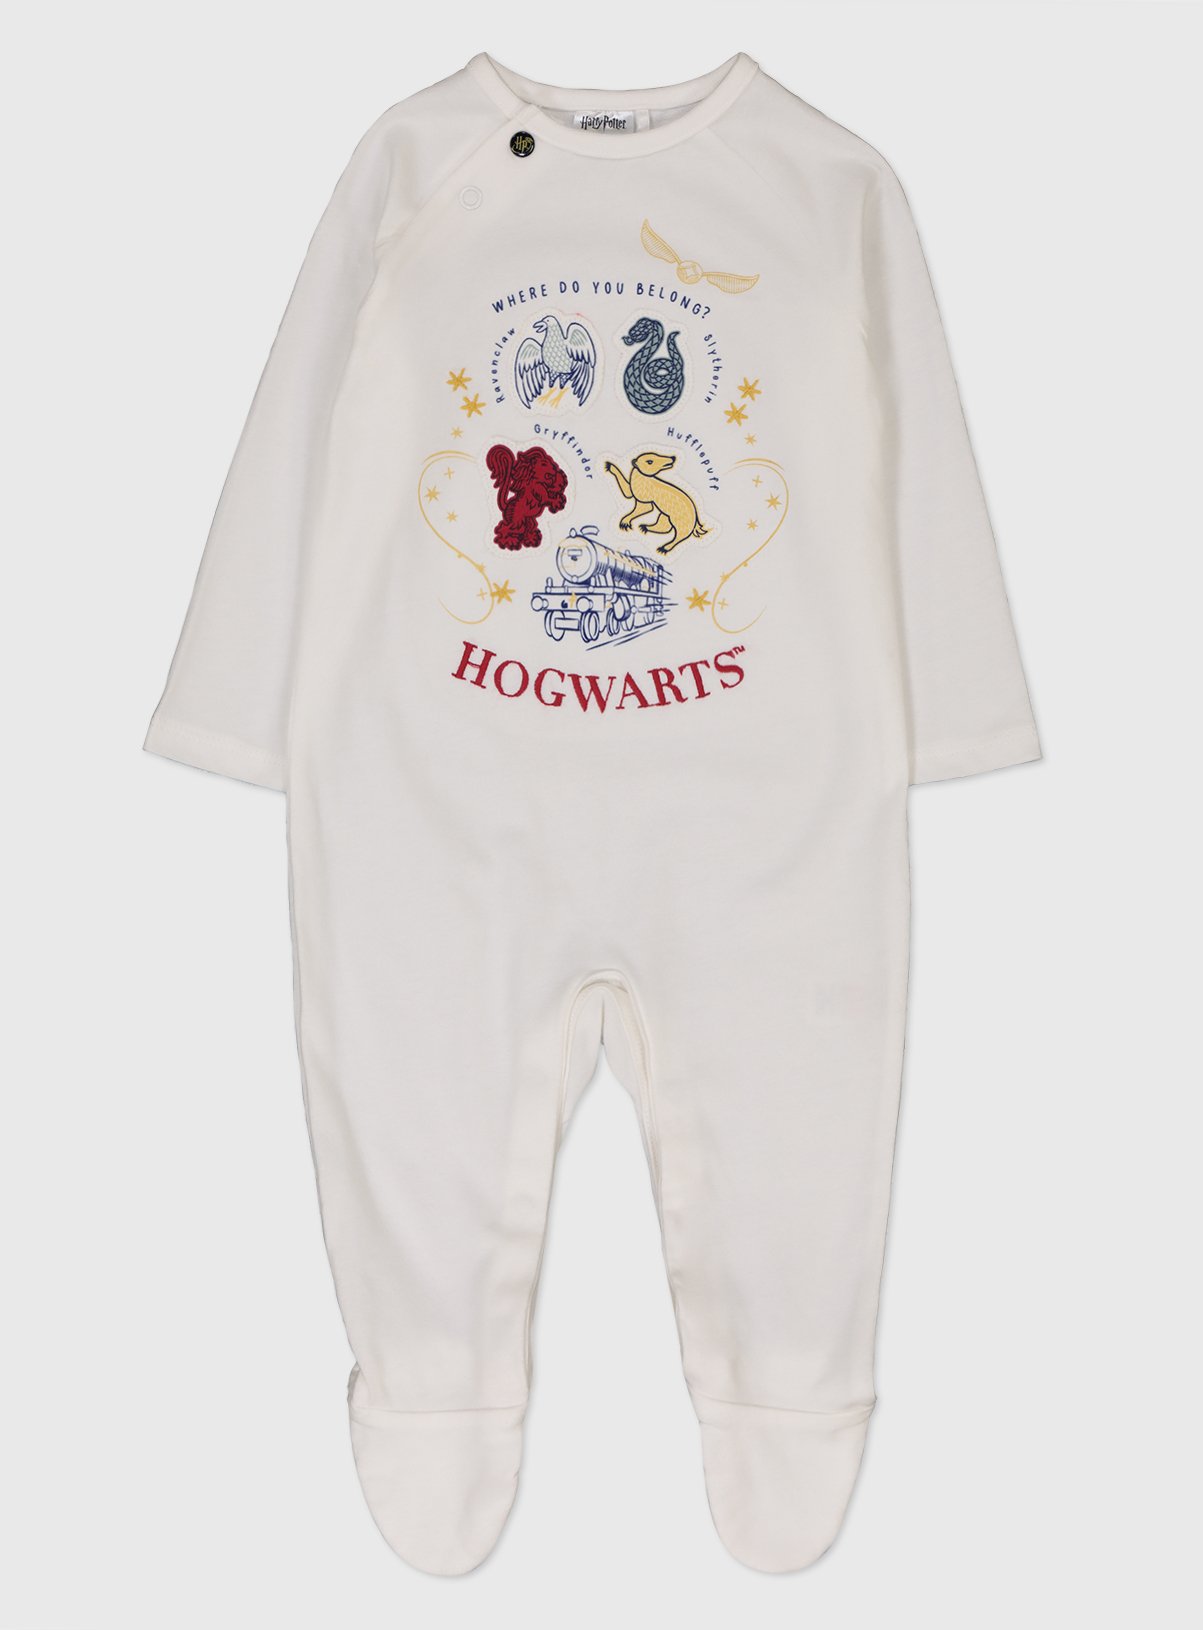 Snuggle This Muggle Harry Potter Inspired New Born Baby Boy Girl Sleepsuit Designed and Printed in The UK Using 100/% Fine Combed Cotton